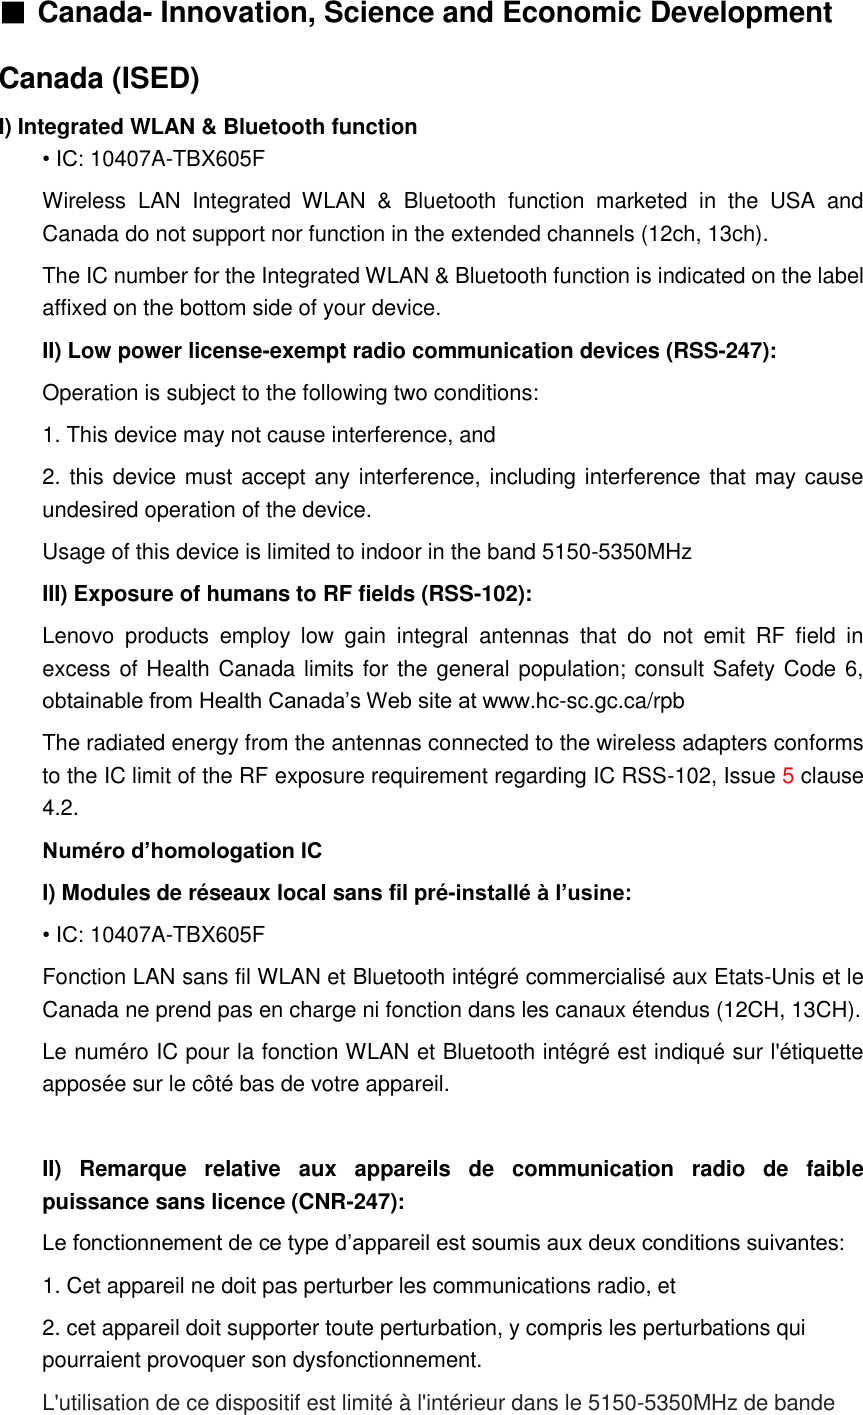 ■ Canada- Innovation, Science and Economic Development Canada (ISED) I) Integrated WLAN &amp; Bluetooth function • IC: 10407A-TBX605F Wireless  LAN  Integrated  WLAN  &amp;  Bluetooth  function  marketed  in  the  USA  and Canada do not support nor function in the extended channels (12ch, 13ch). The IC number for the Integrated WLAN &amp; Bluetooth function is indicated on the label affixed on the bottom side of your device. II) Low power license-exempt radio communication devices (RSS-247): Operation is subject to the following two conditions: 1. This device may not cause interference, and 2. this device must accept any interference, including interference that may cause undesired operation of the device. Usage of this device is limited to indoor in the band 5150-5350MHz   III) Exposure of humans to RF fields (RSS-102): Lenovo  products  employ  low  gain  integral  antennas  that  do  not  emit  RF  field  in excess of Health Canada limits for the general population; consult Safety Code 6, obtainable from Health Canada’s Web site at www.hc-sc.gc.ca/rpb   The radiated energy from the antennas connected to the wireless adapters conforms to the IC limit of the RF exposure requirement regarding IC RSS-102, Issue 5 clause 4.2. Numéro d’homologation IC I) Modules de réseaux local sans fil pré-installé à l’usine: • IC: 10407A-TBX605F Fonction LAN sans fil WLAN et Bluetooth intégré commercialisé aux Etats-Unis et le Canada ne prend pas en charge ni fonction dans les canaux étendus (12CH, 13CH). Le numéro IC pour la fonction WLAN et Bluetooth intégré est indiqué sur l&apos;étiquette apposée sur le côté bas de votre appareil.  II)  Remarque  relative  aux  appareils  de  communication  radio  de  faible puissance sans licence (CNR-247): Le fonctionnement de ce type d’appareil est soumis aux deux conditions suivantes: 1. Cet appareil ne doit pas perturber les communications radio, et 2. cet appareil doit supporter toute perturbation, y compris les perturbations qui pourraient provoquer son dysfonctionnement. L&apos;utilisation de ce dispositif est limité à l&apos;intérieur dans le 5150-5350MHz de bande   